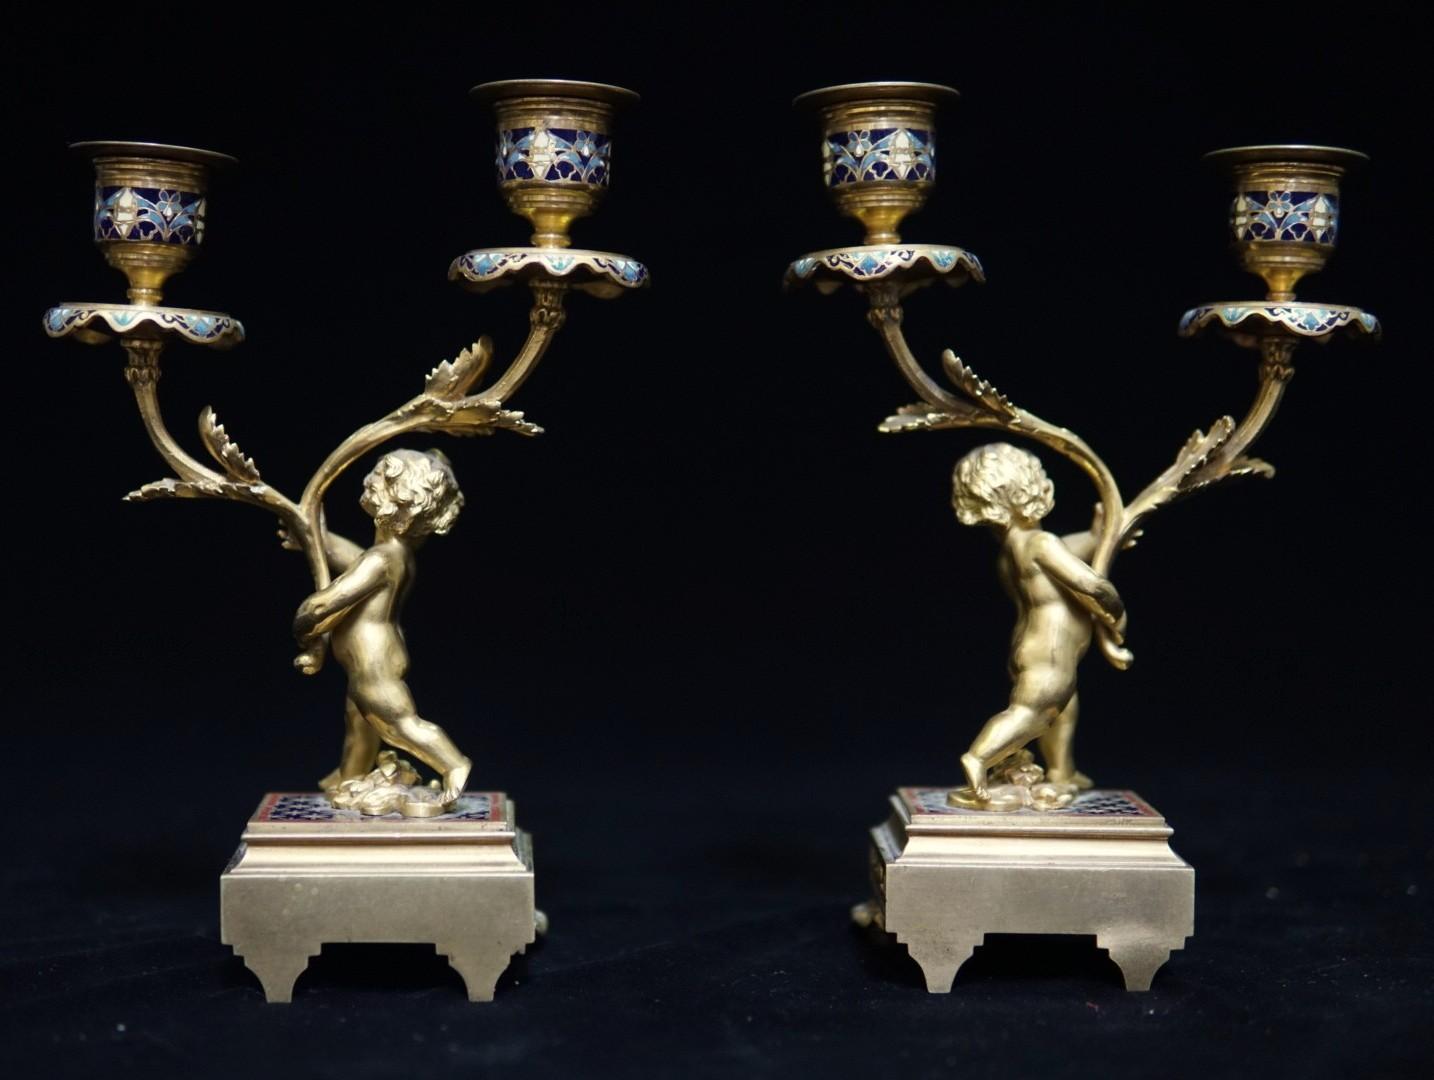 Pair of French Ormolu and Cloisonné Candlesticks, 19th Century 10